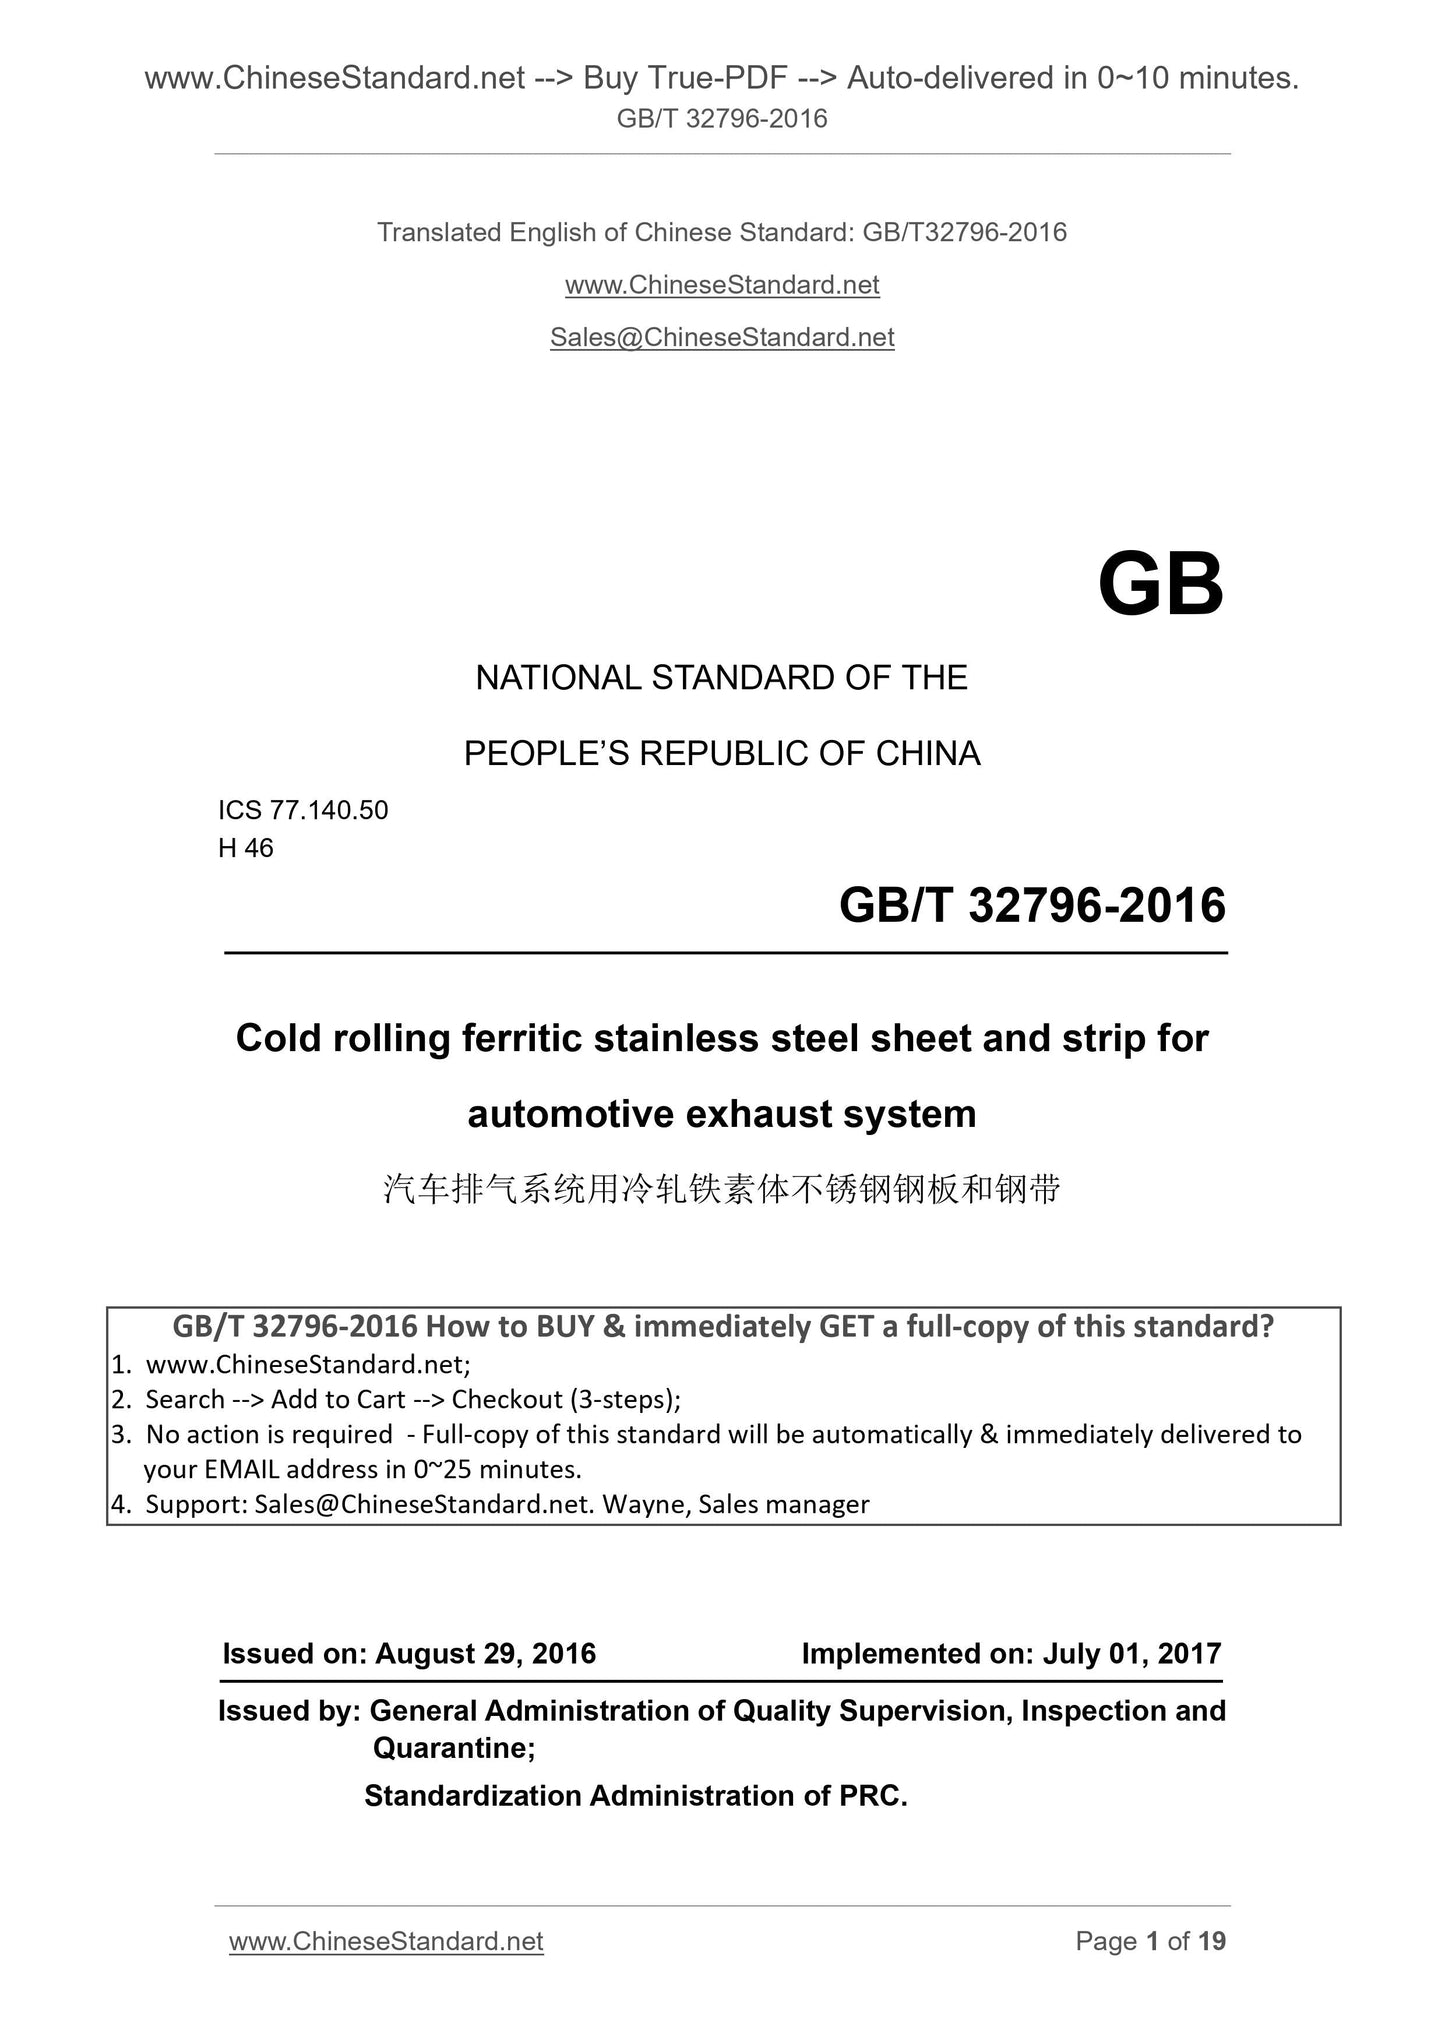 GB/T 32796-2016 Page 1